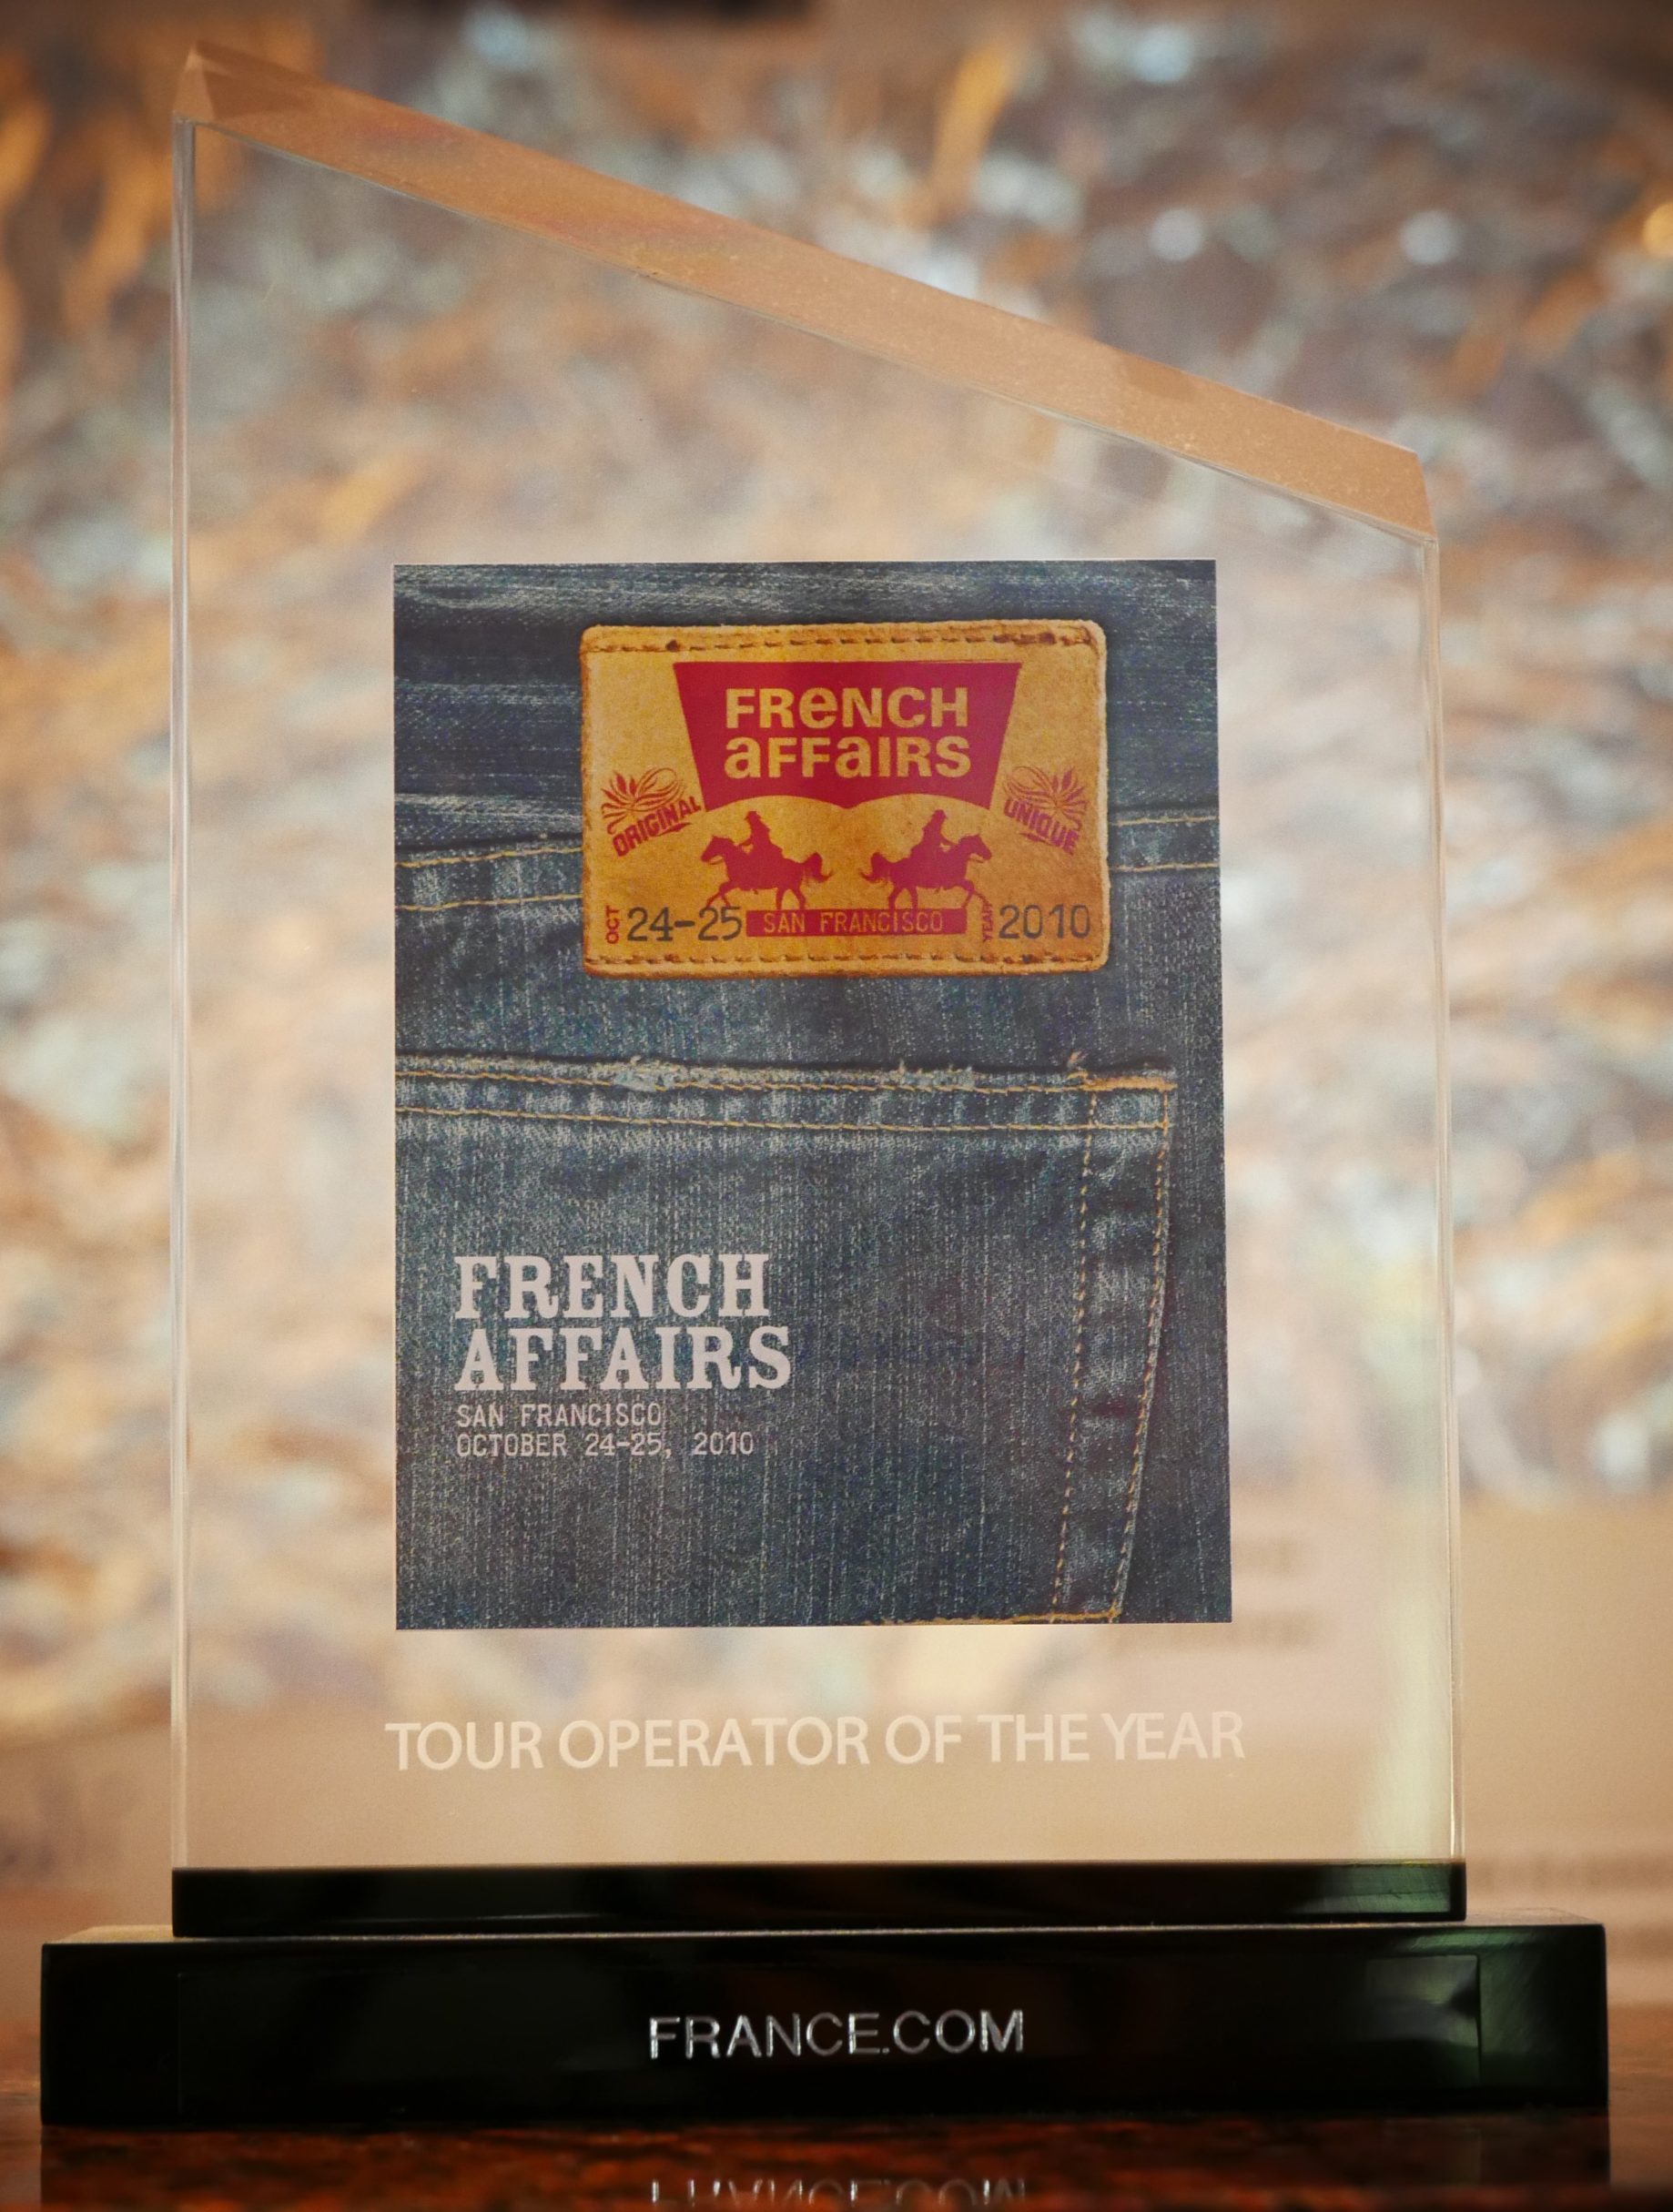 France.com wins Atout France’s award for the tour operator with ‘The Most Diverse and Extensive Offer’